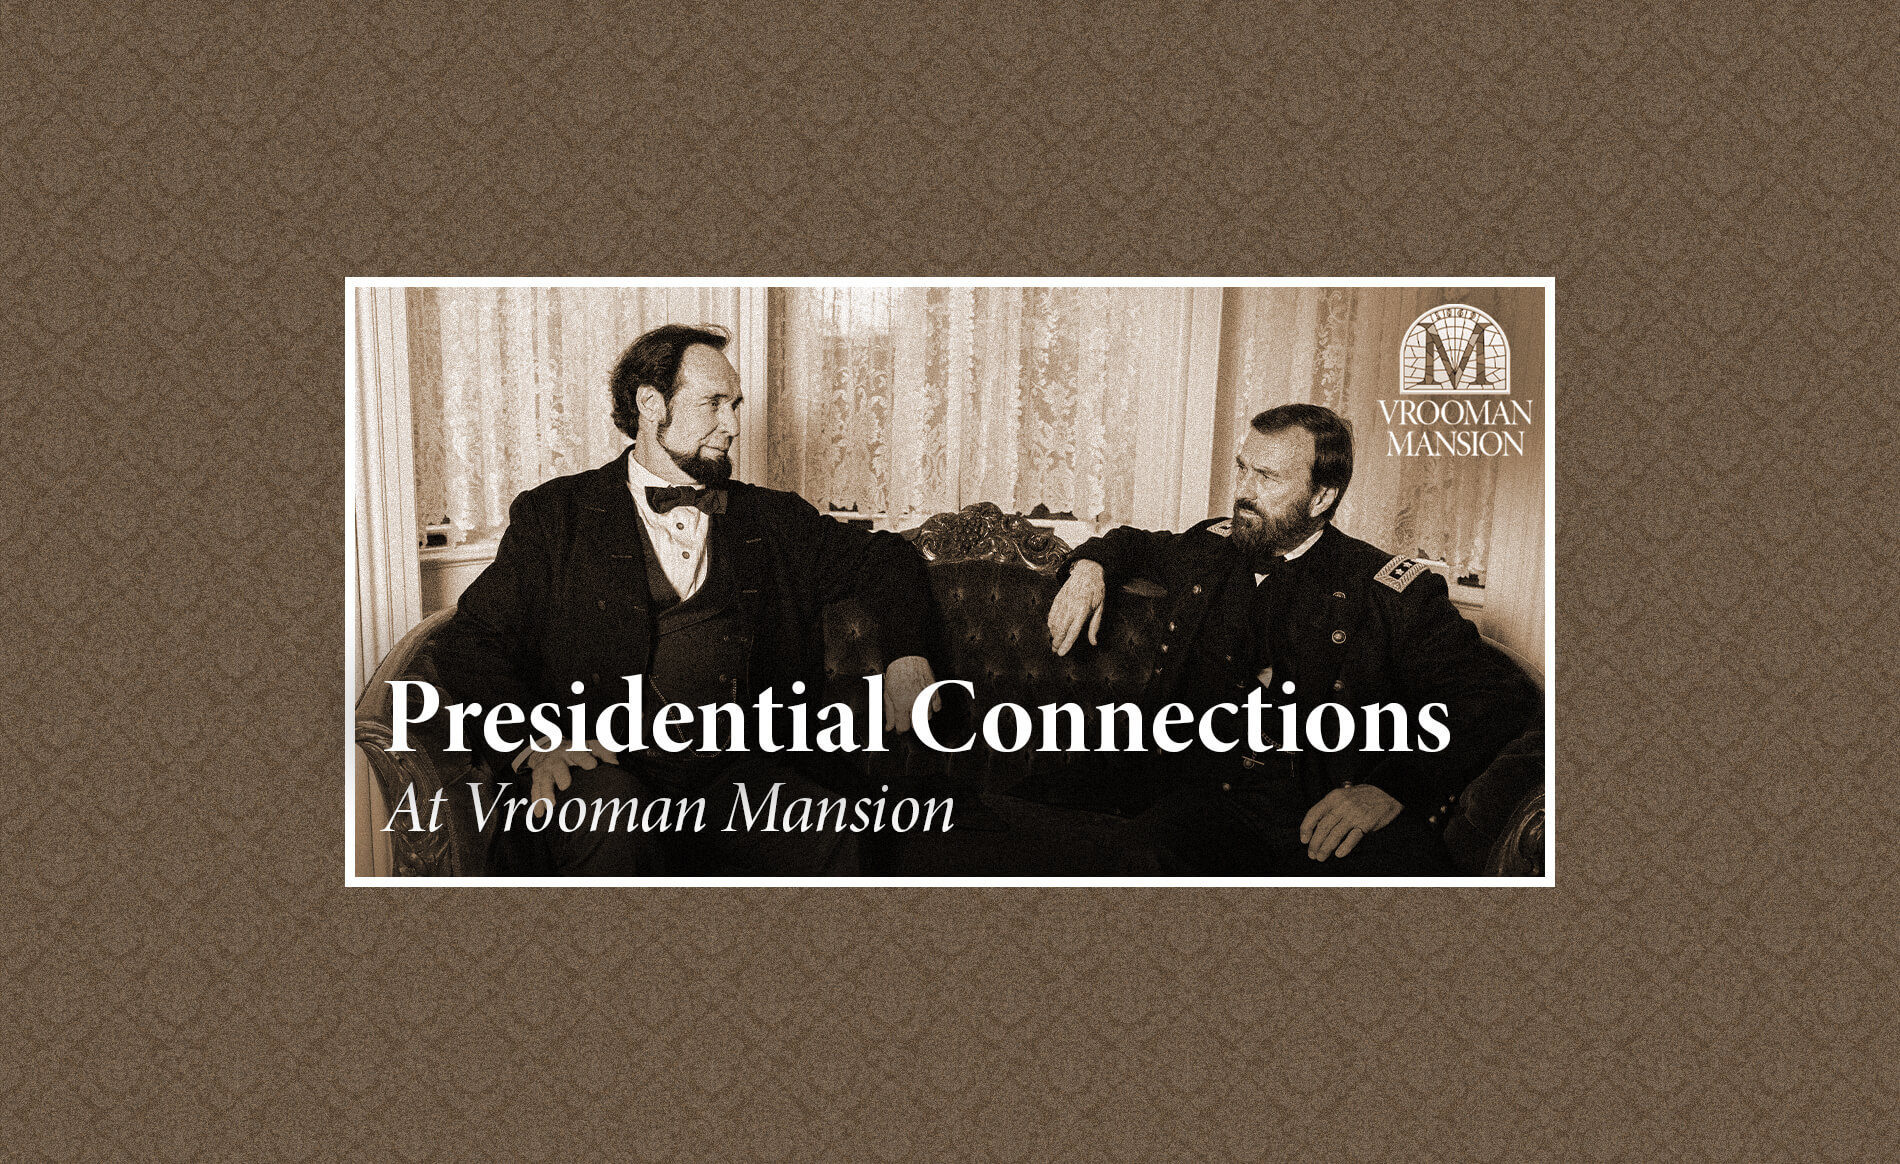 actors portraying US Presidents Lincoln and Grant sit together on the parlor couch